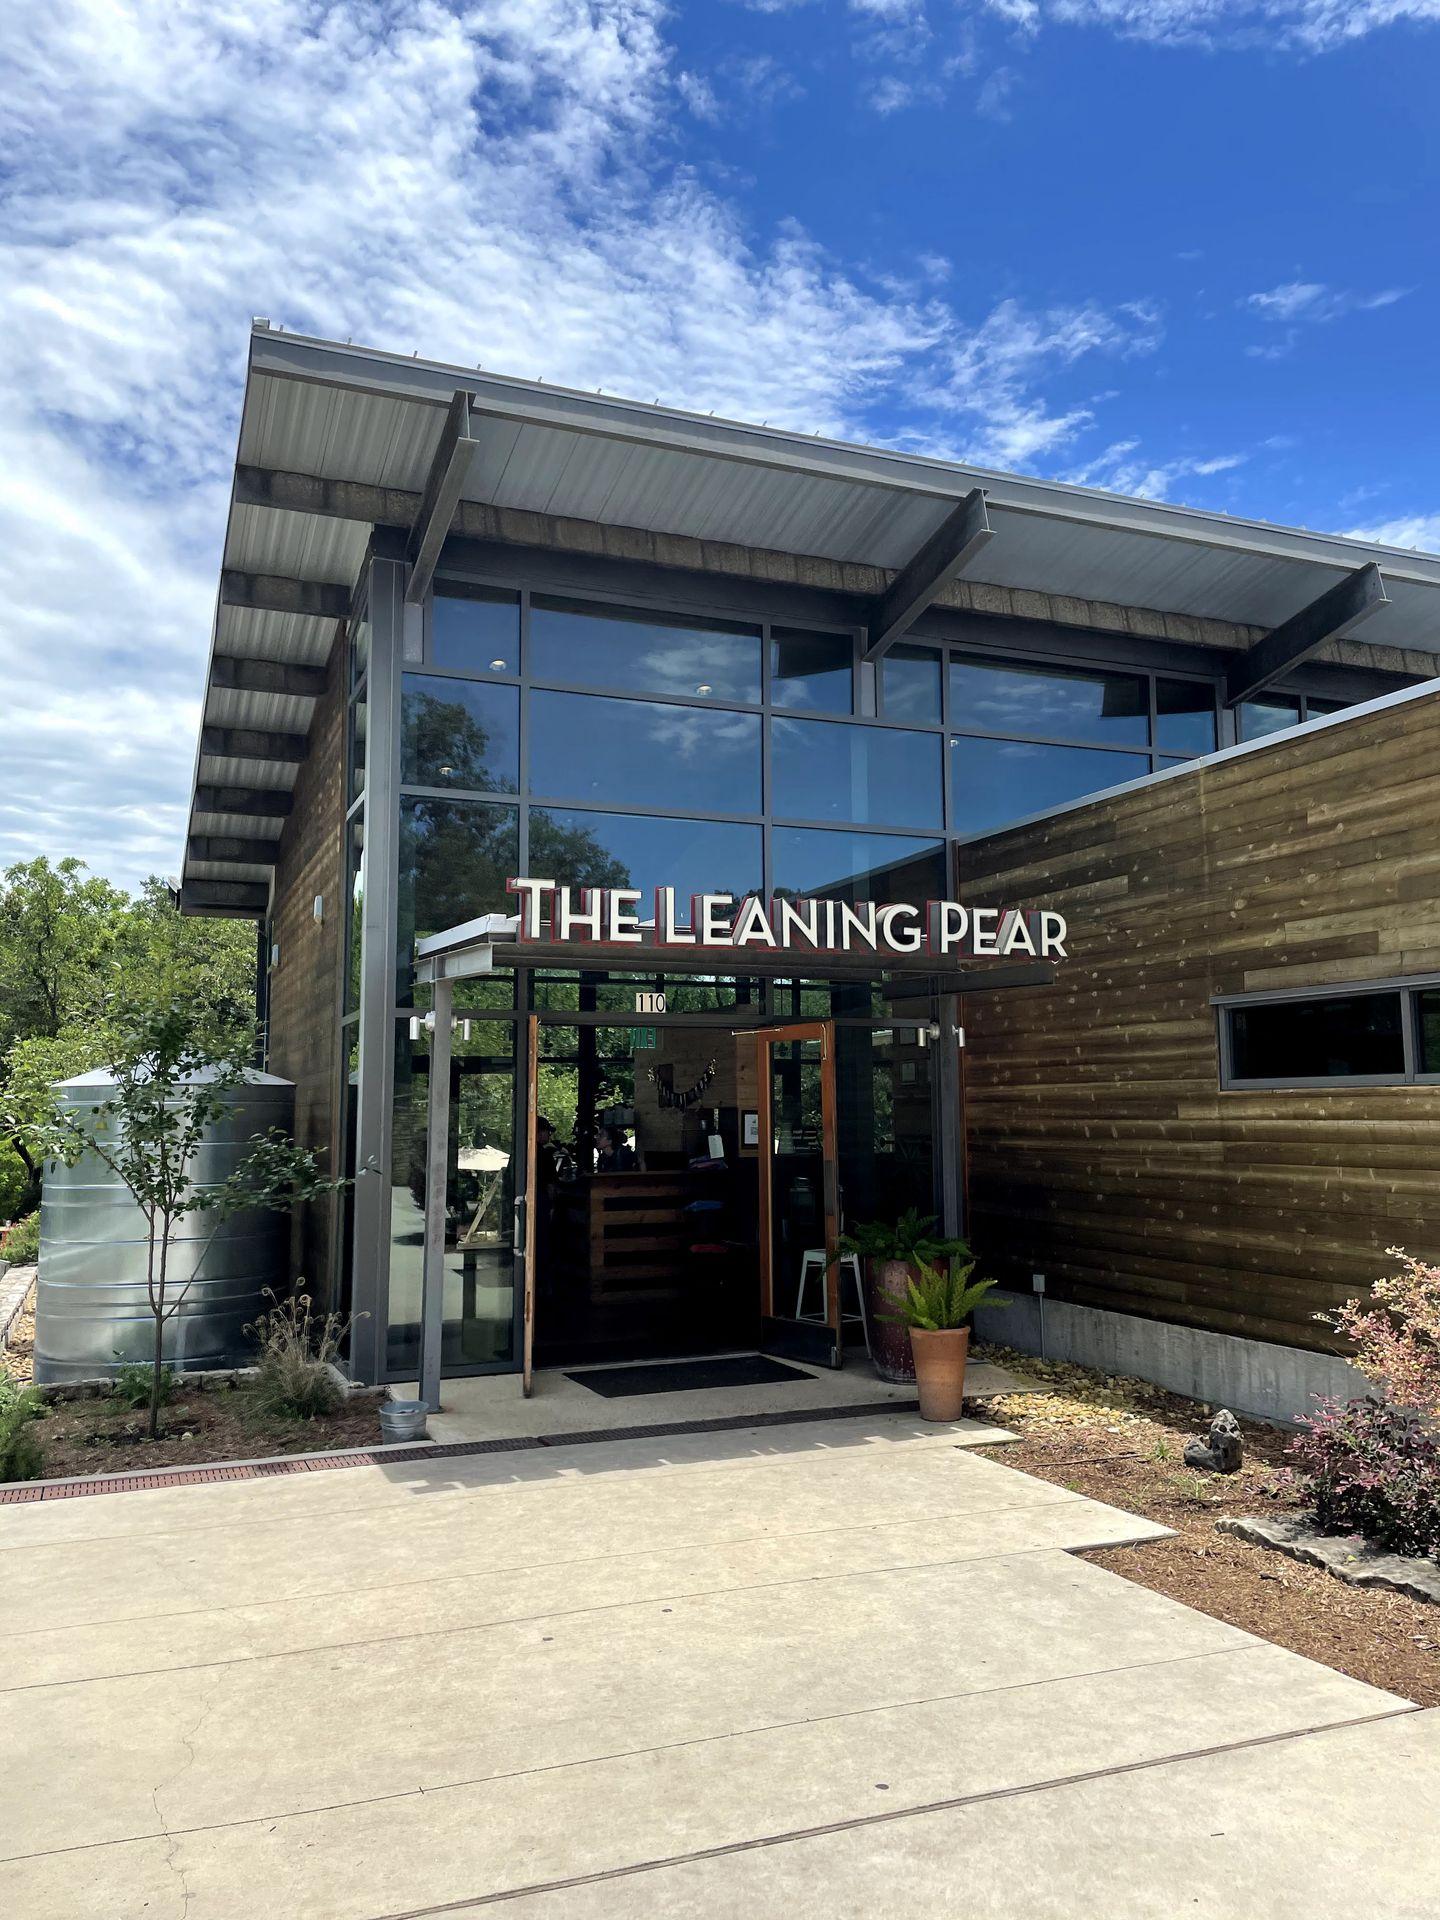 The exterior of The Leaning Pear, which looks modern with a lot of glass windows.